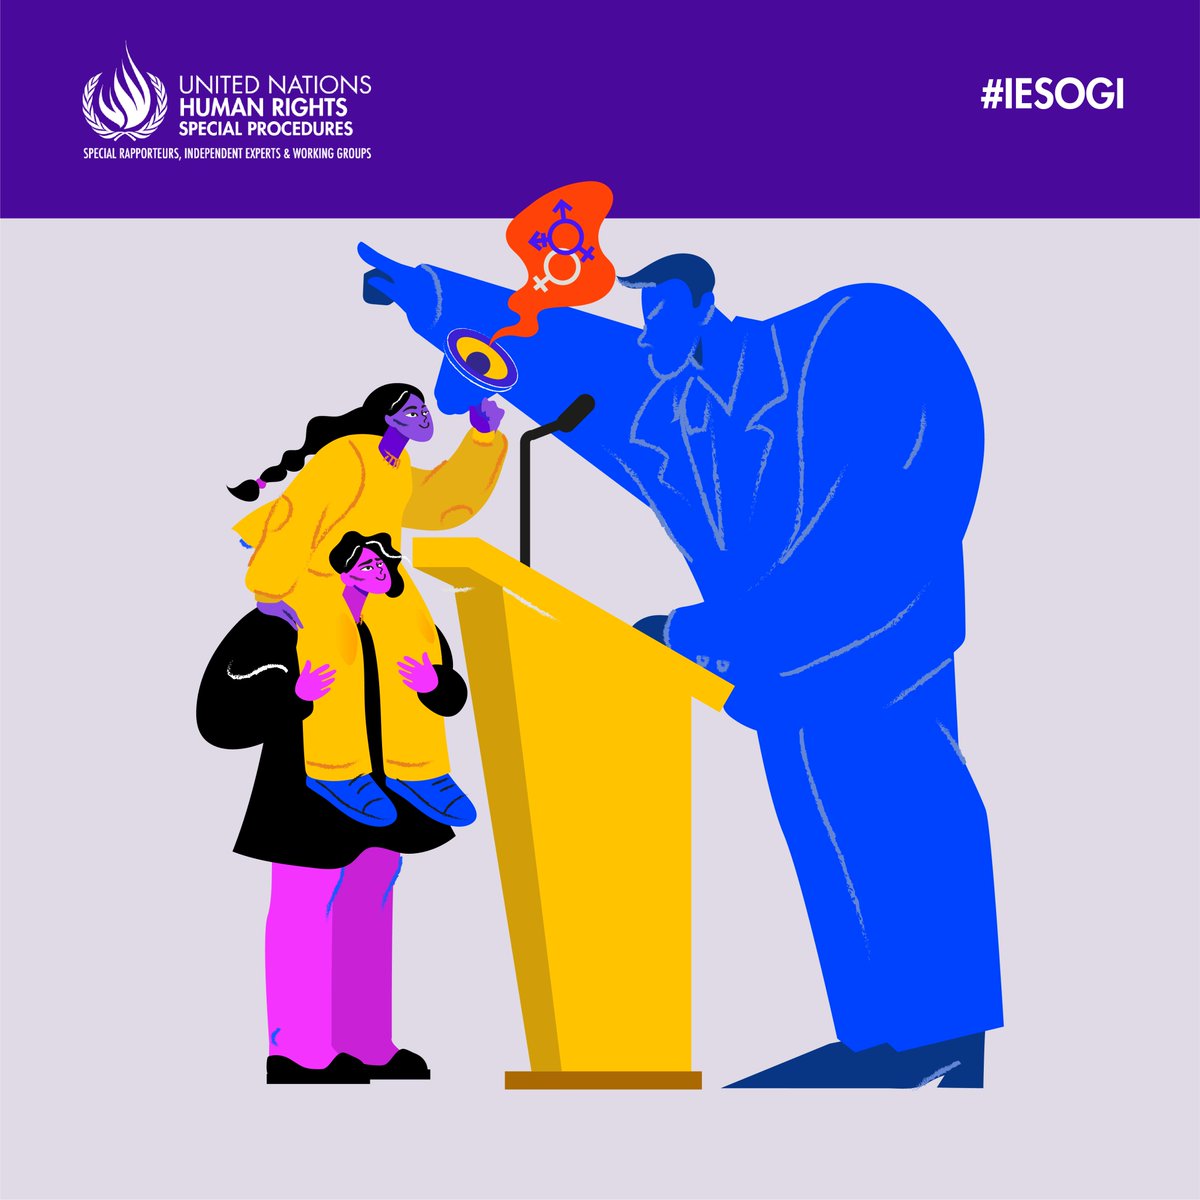 📢 JOB POSTING – APPLY NOW (deadline 22 Feb): Come work with the @IESOGI as an Outreach Consultant. Use your communications expertise to produce content & manage public information campaigns to defend the #HumanRights of all from violations based on #SOGI: inspira.un.org/psc/UNCAREERS/…